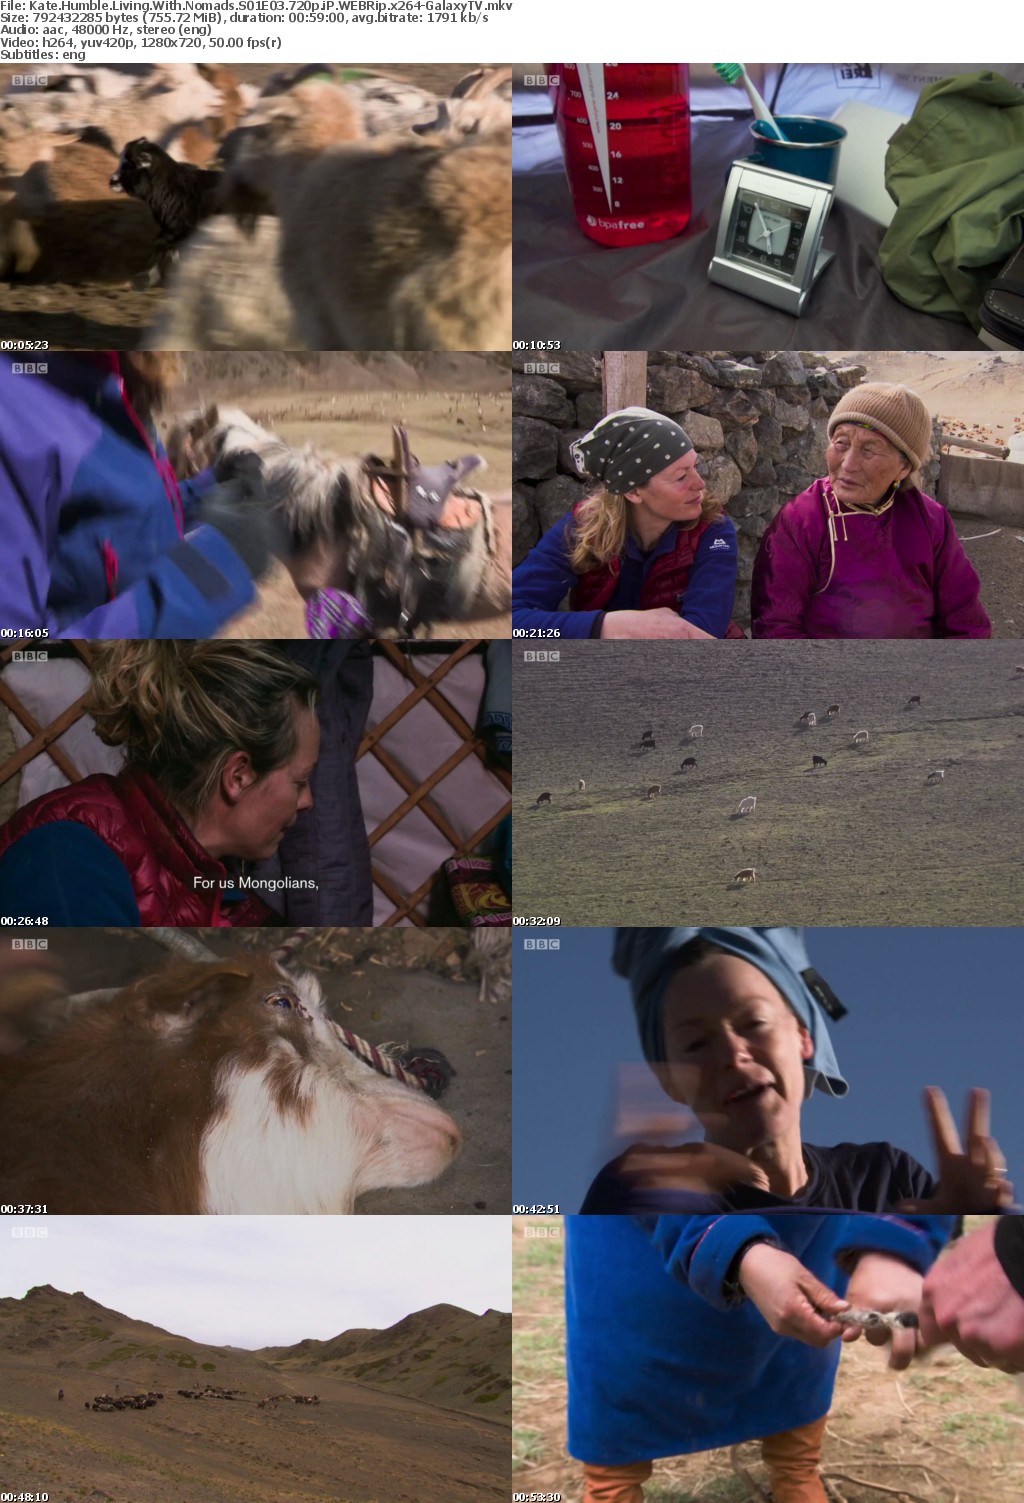 Kate Humble Living With Nomads S01 COMPLETE 720p iP WEBRip x264-GalaxyTV